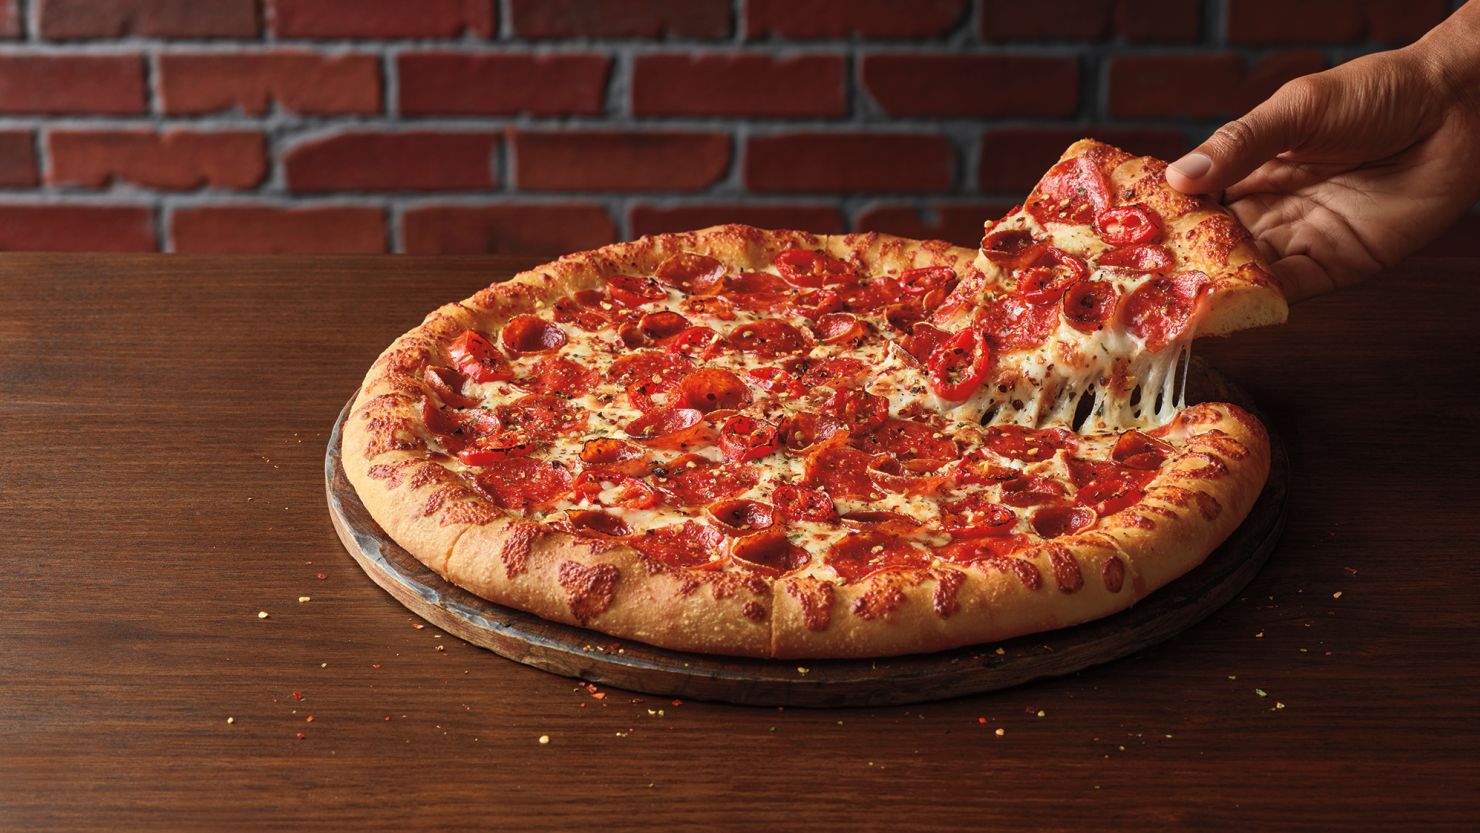 Pizza Hut's Spicy Lover's Pizza is now on sale.